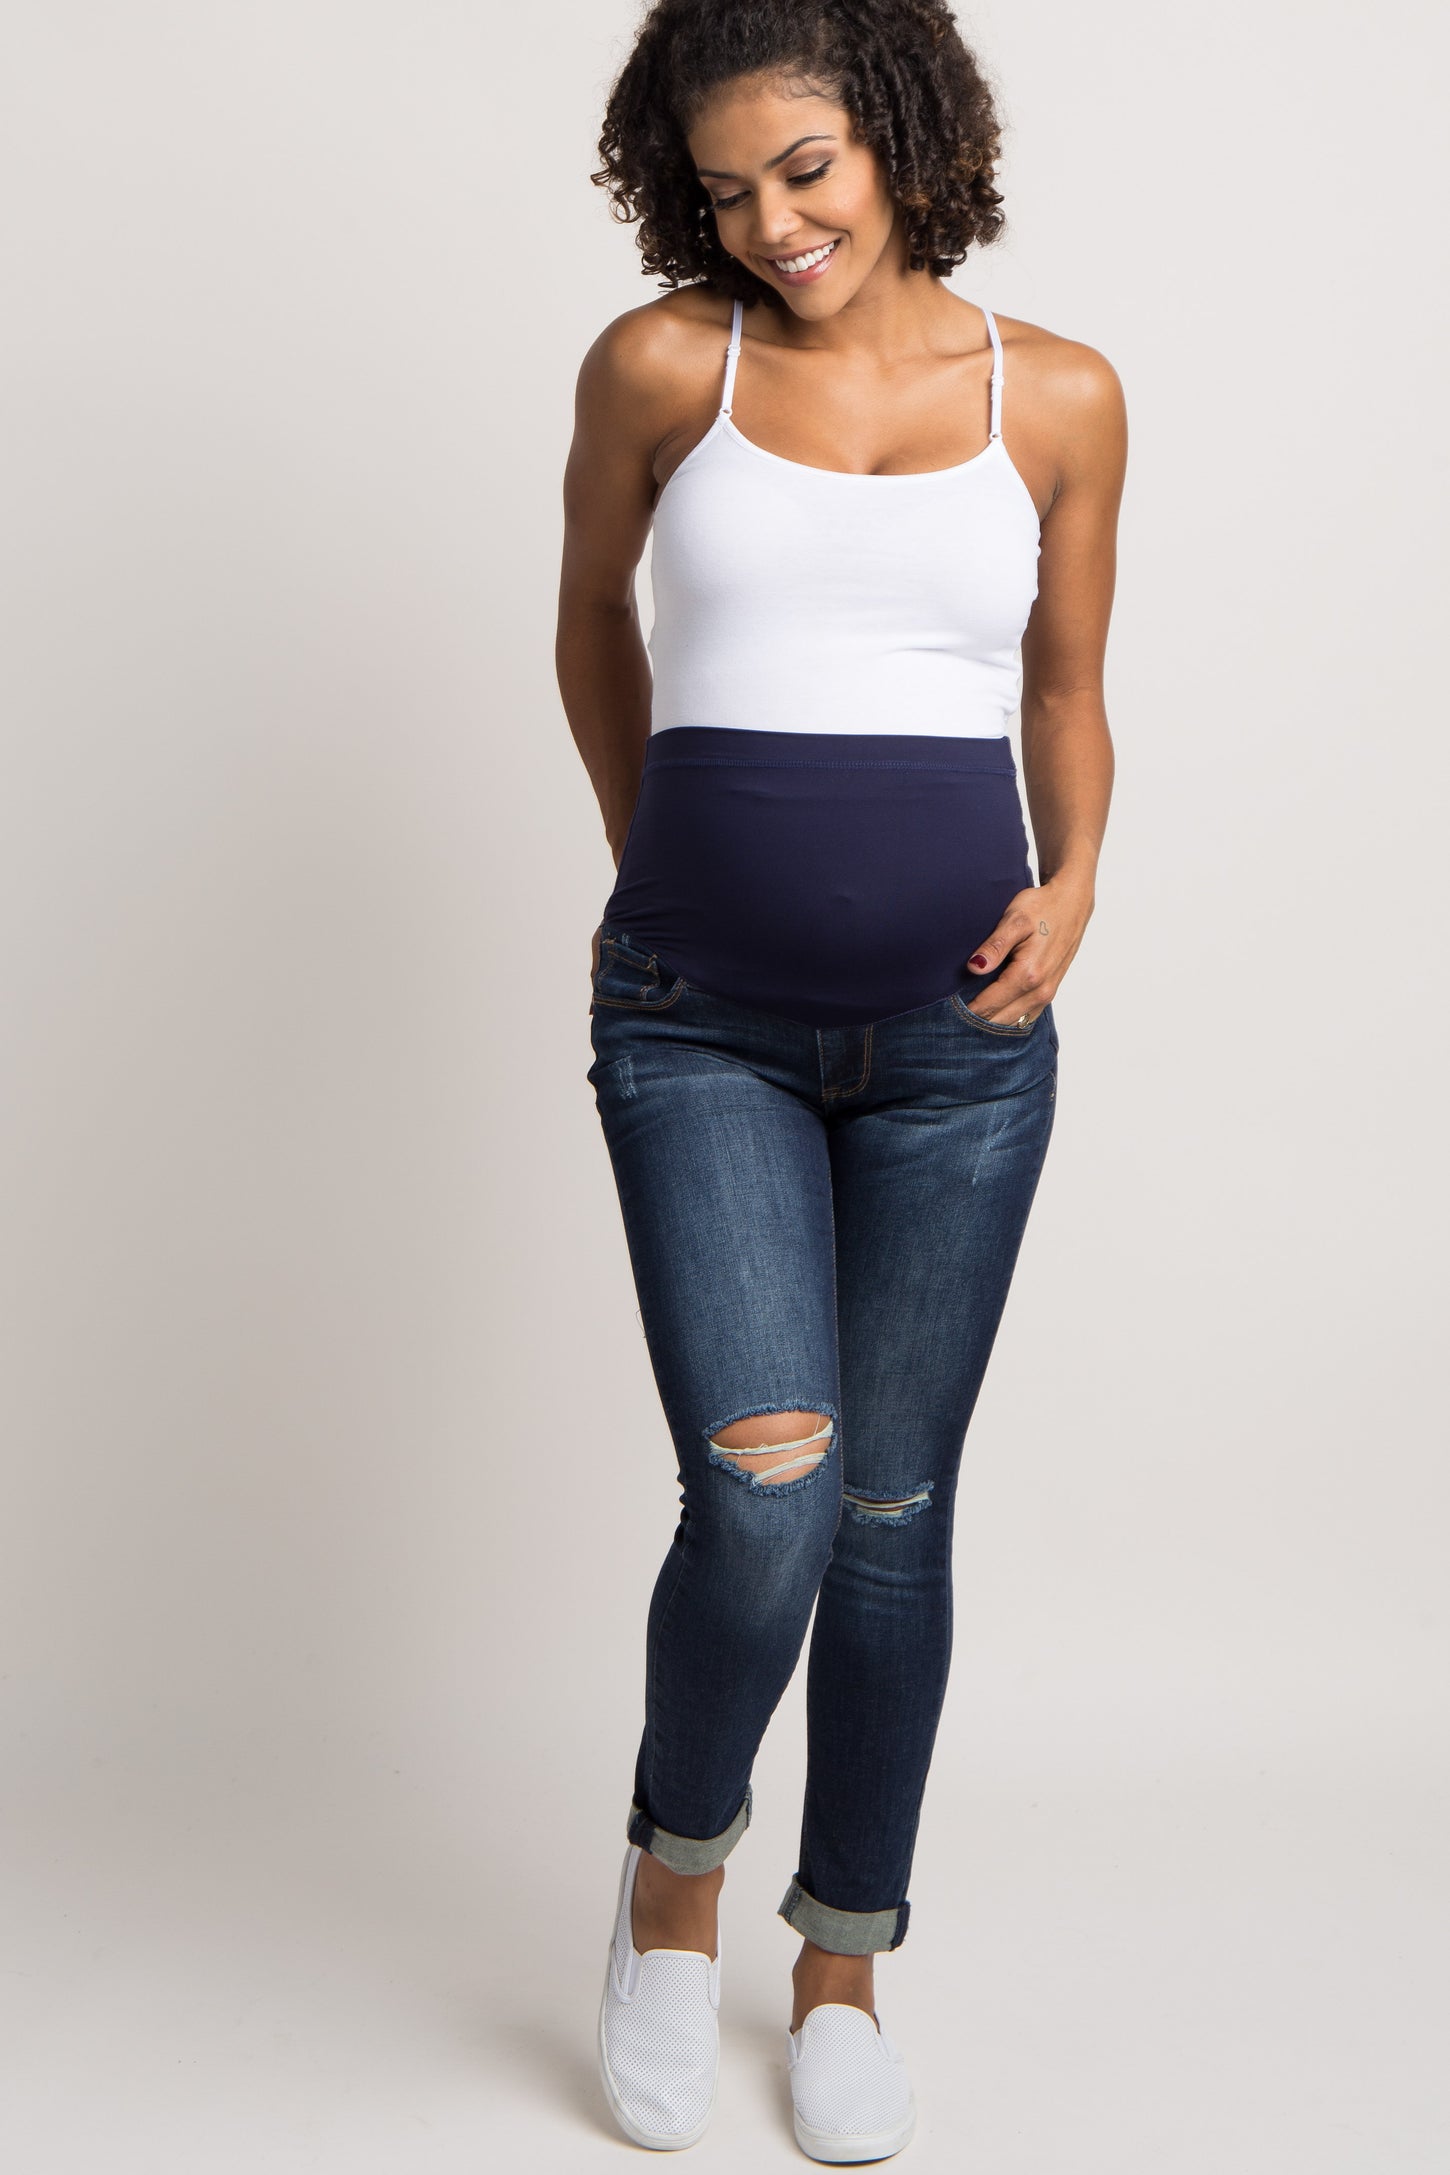 Navy Blue Ripped Knee Cuffed Maternity Jeans